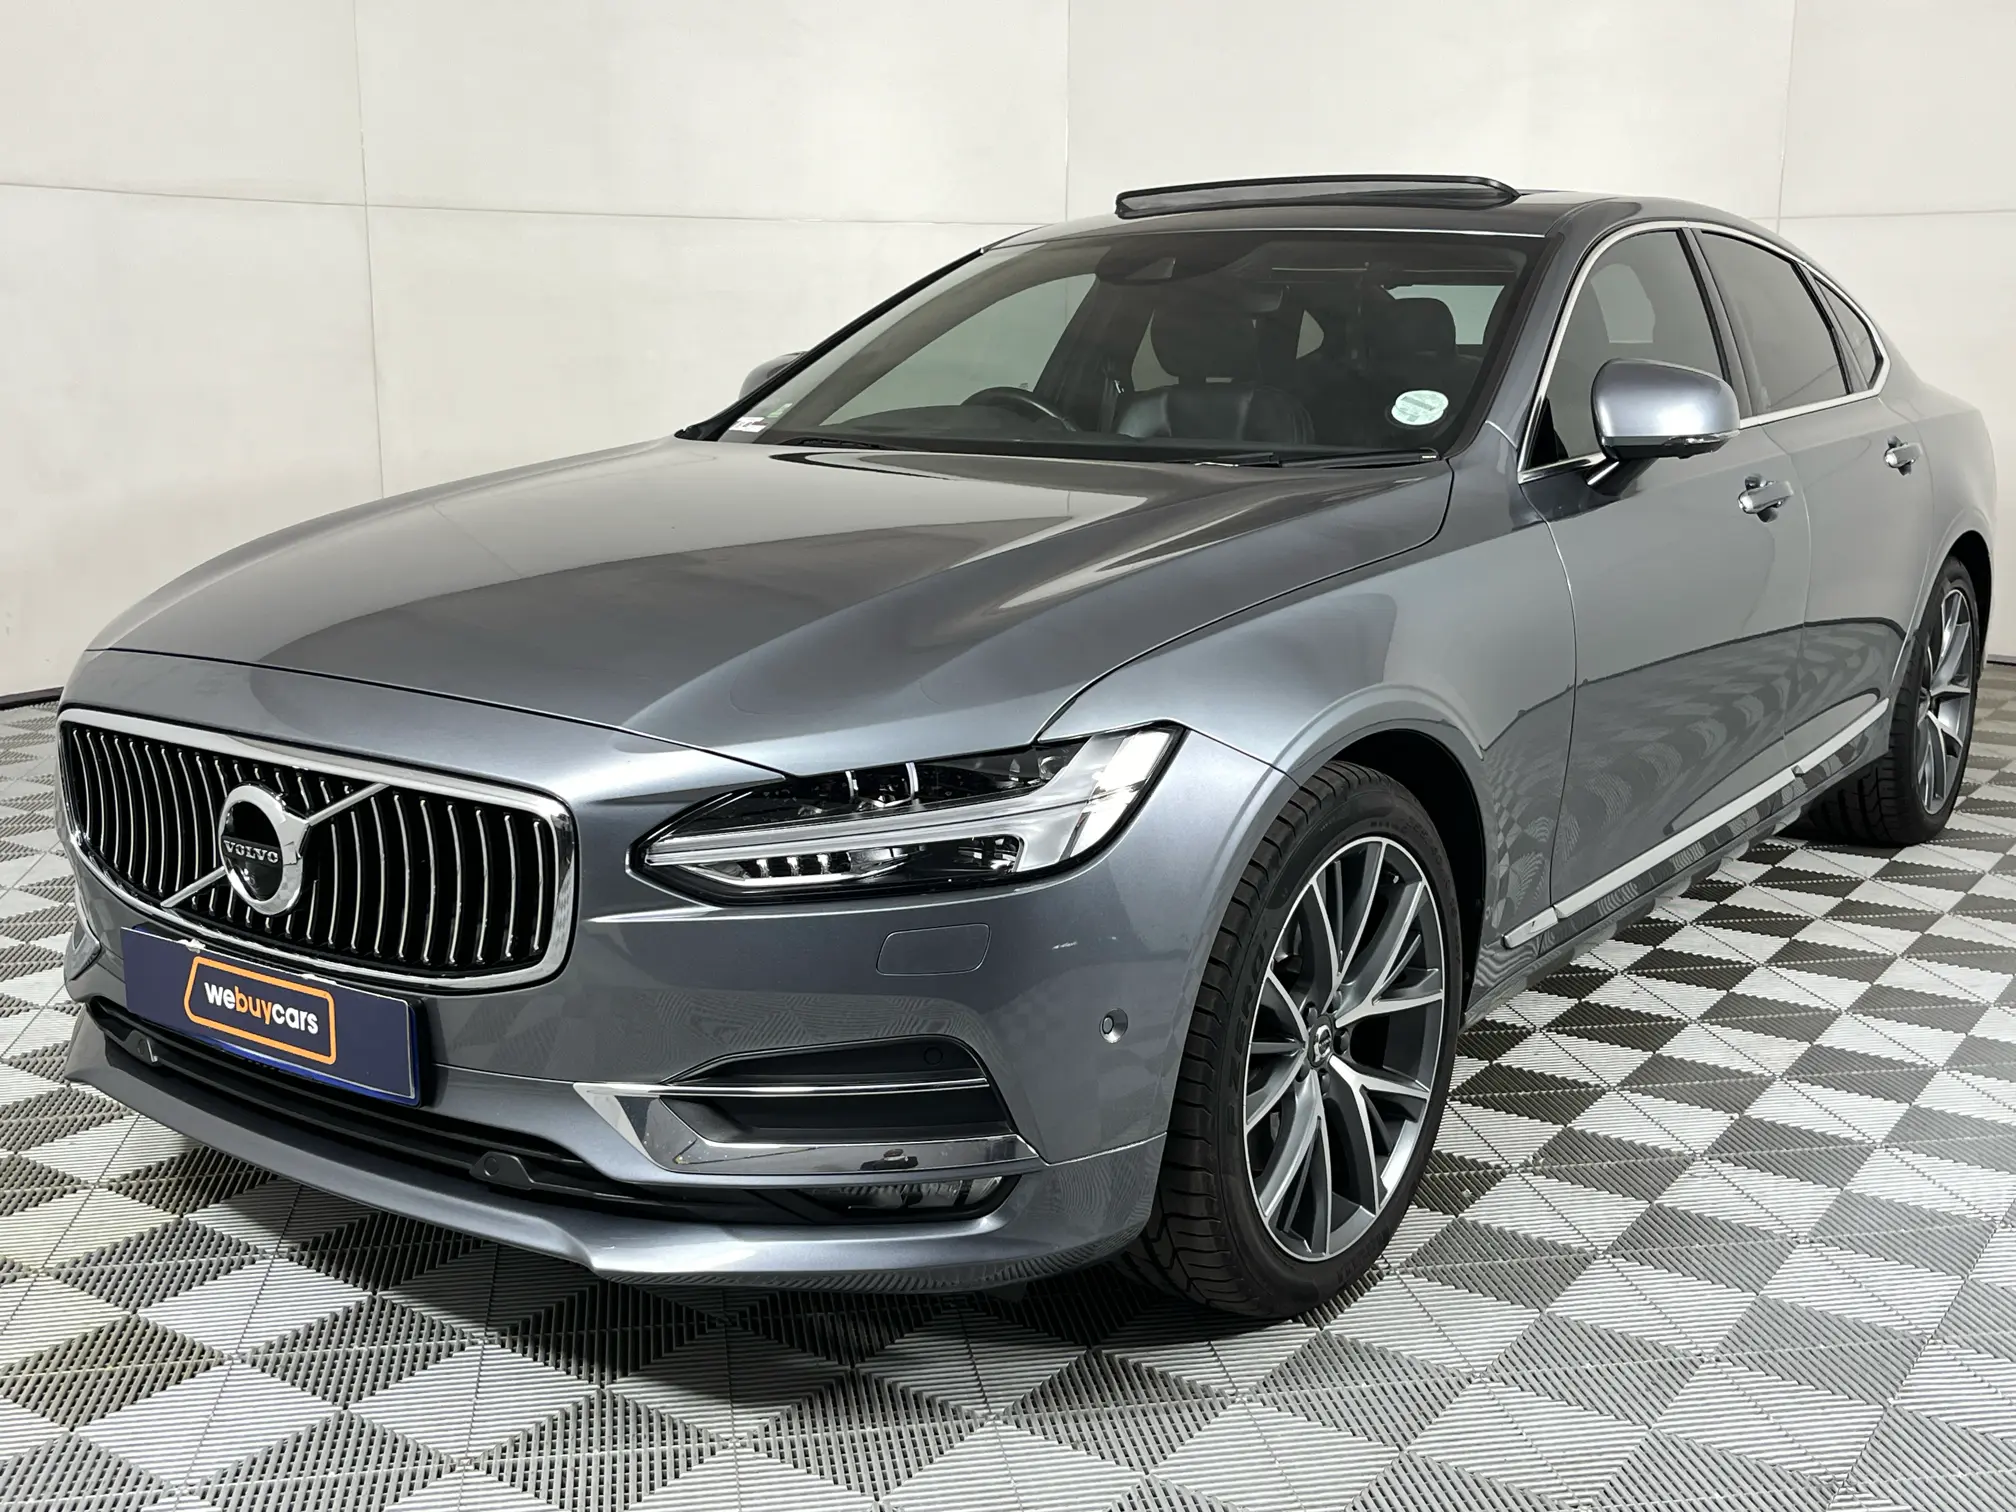 2017 Volvo S90 D5 Inscription Geartronic AWD